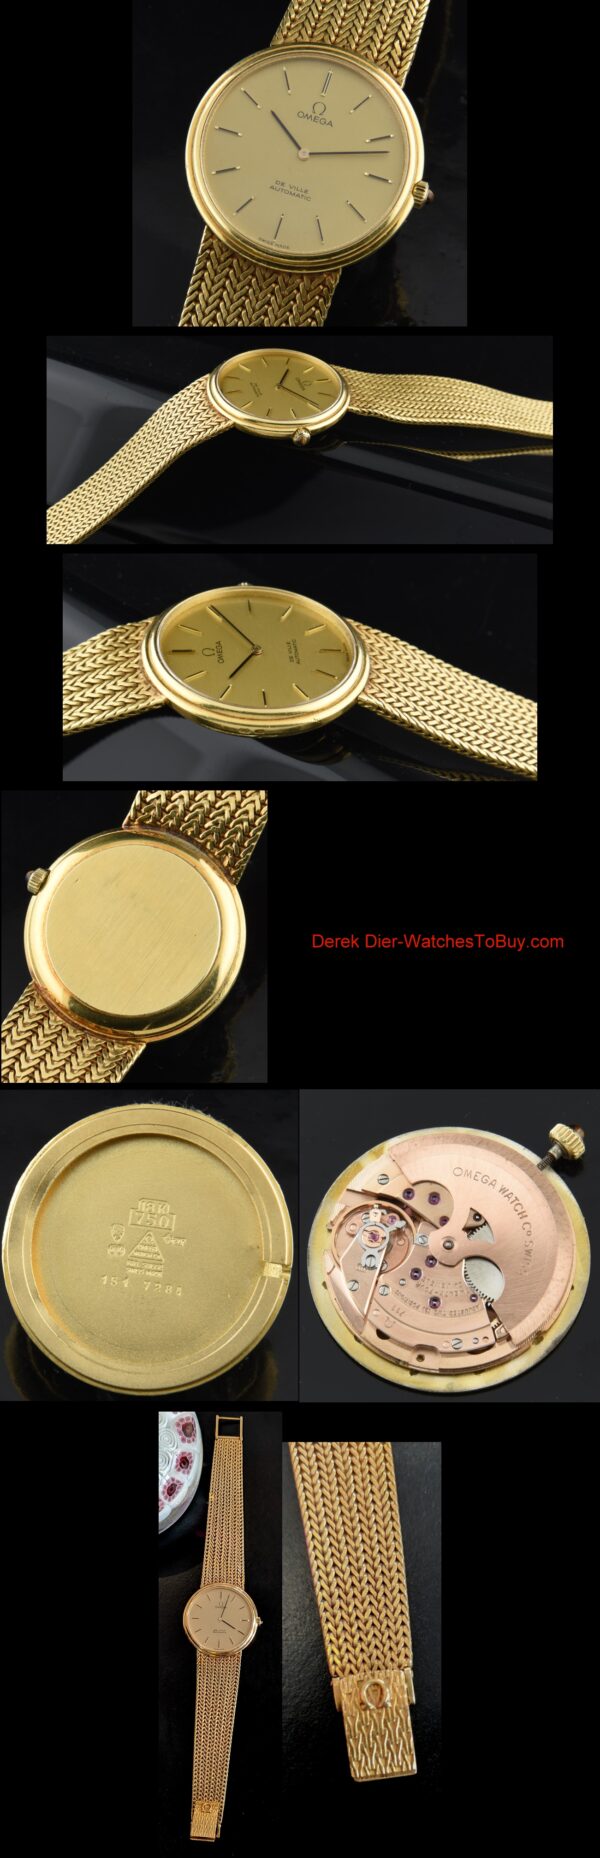 1980s Omega 33mm De Ville heavy 18k solid-gold watch with original champagne dial, bracelet, baton markers, and automatic winding movement.